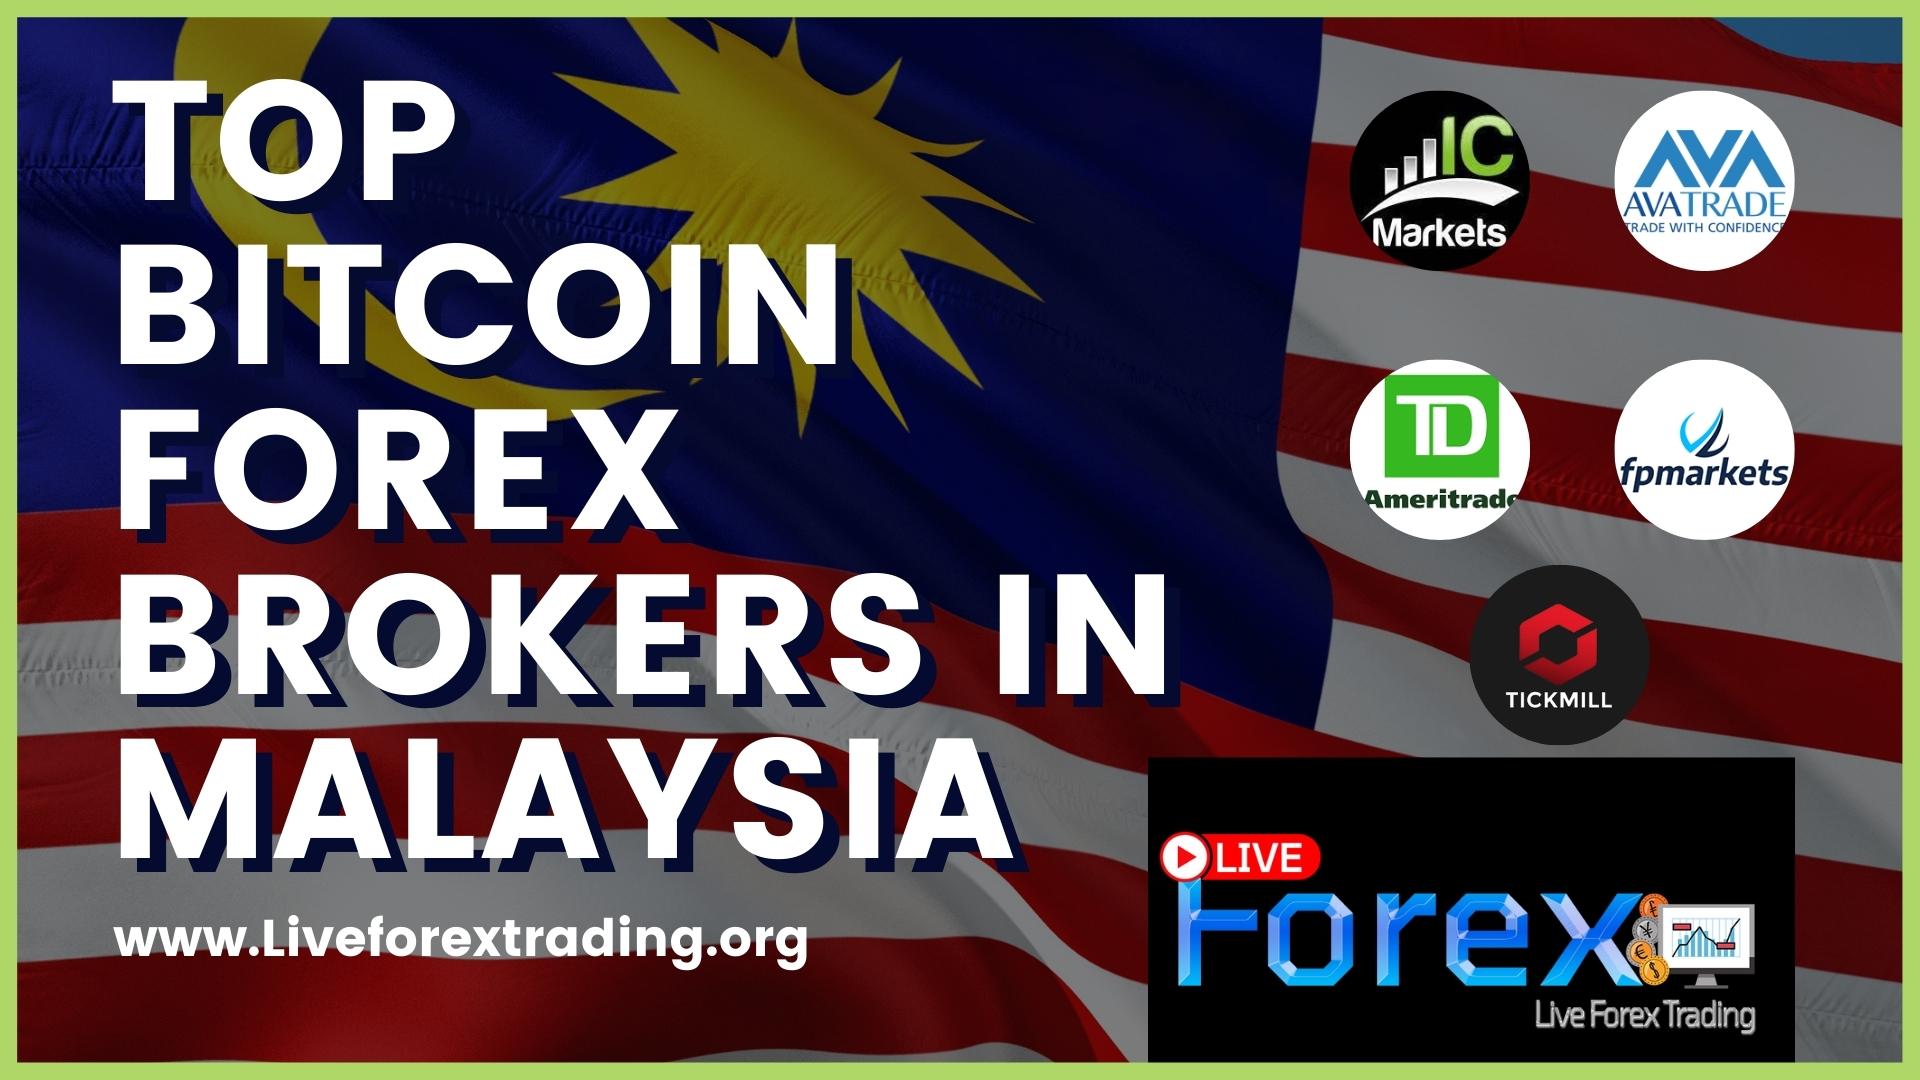 Top BitCoin Forex Brokers In Malaysia - Live Forex Trading